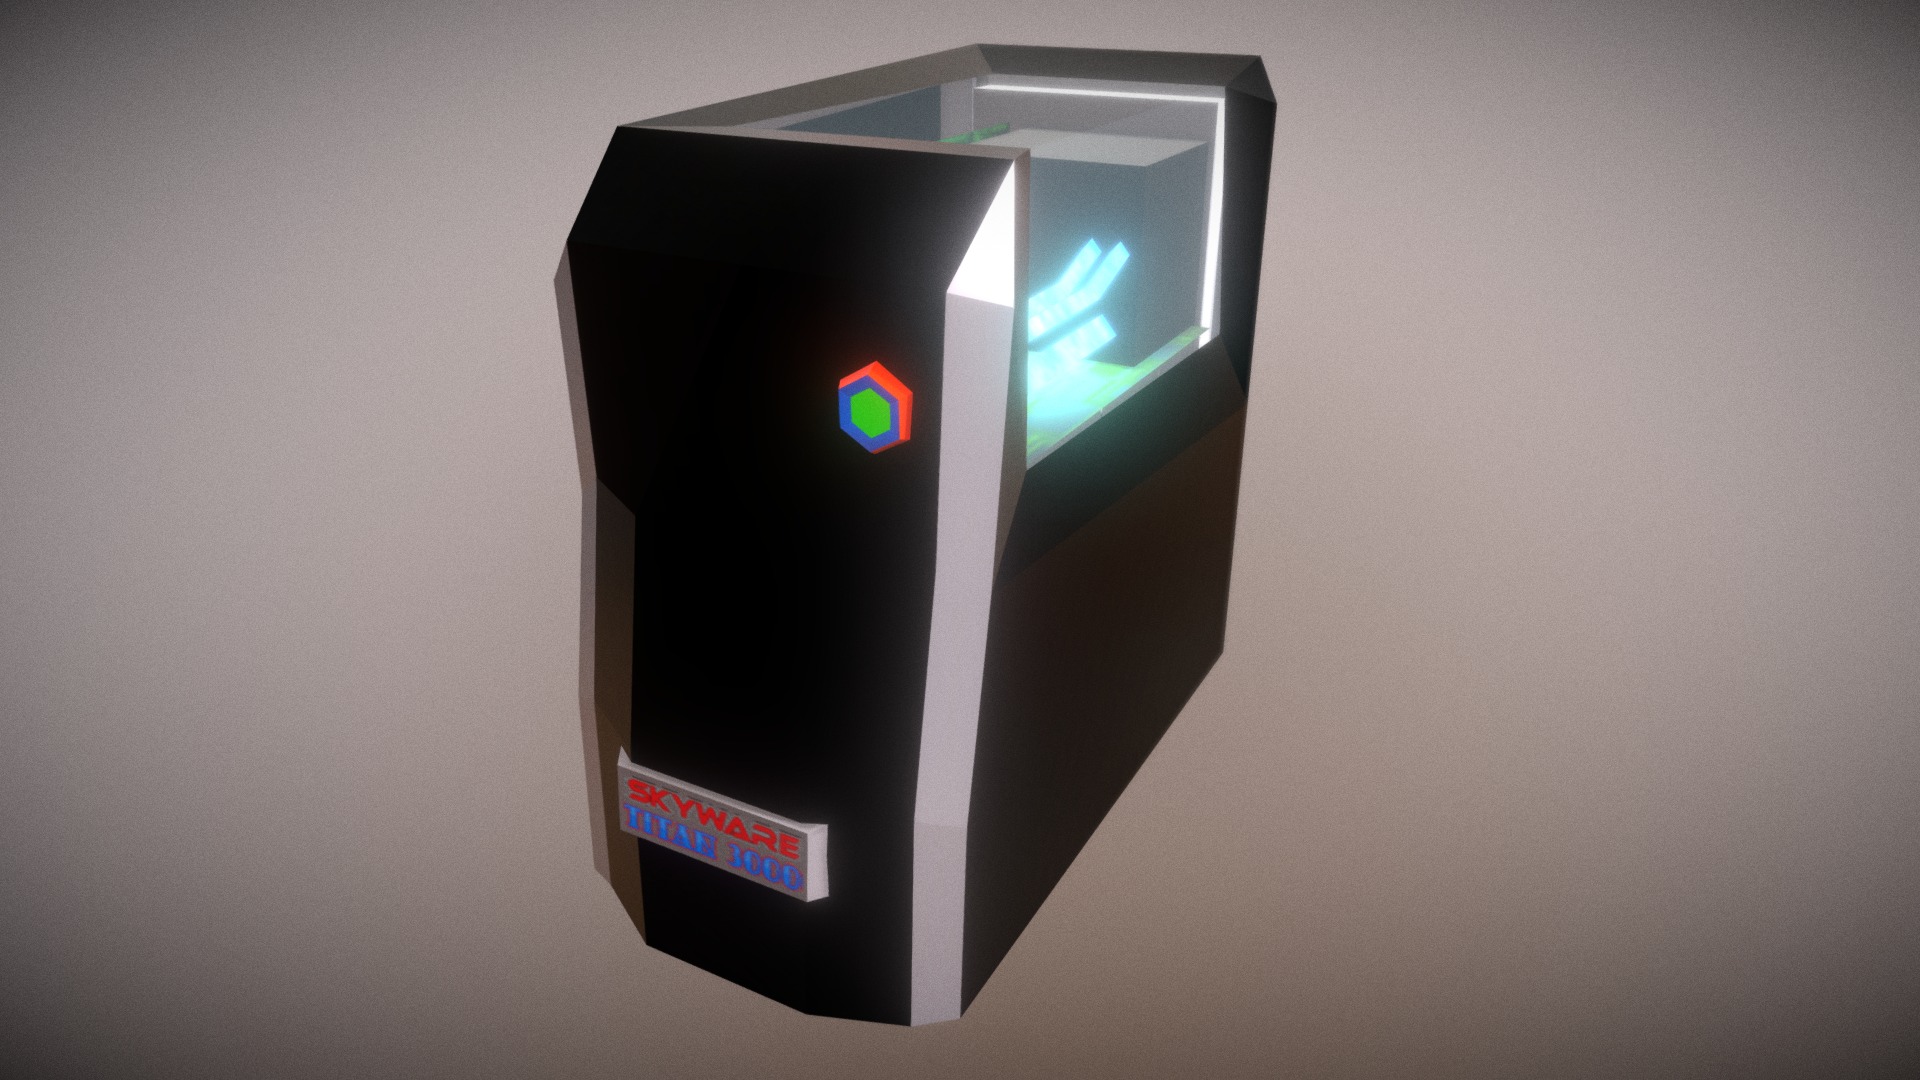 3D model LP Computer: Household Props Challenge Day 5 - This is a 3D model of the LP Computer: Household Props Challenge Day 5. The 3D model is about a black rectangular object with a blue logo on it.